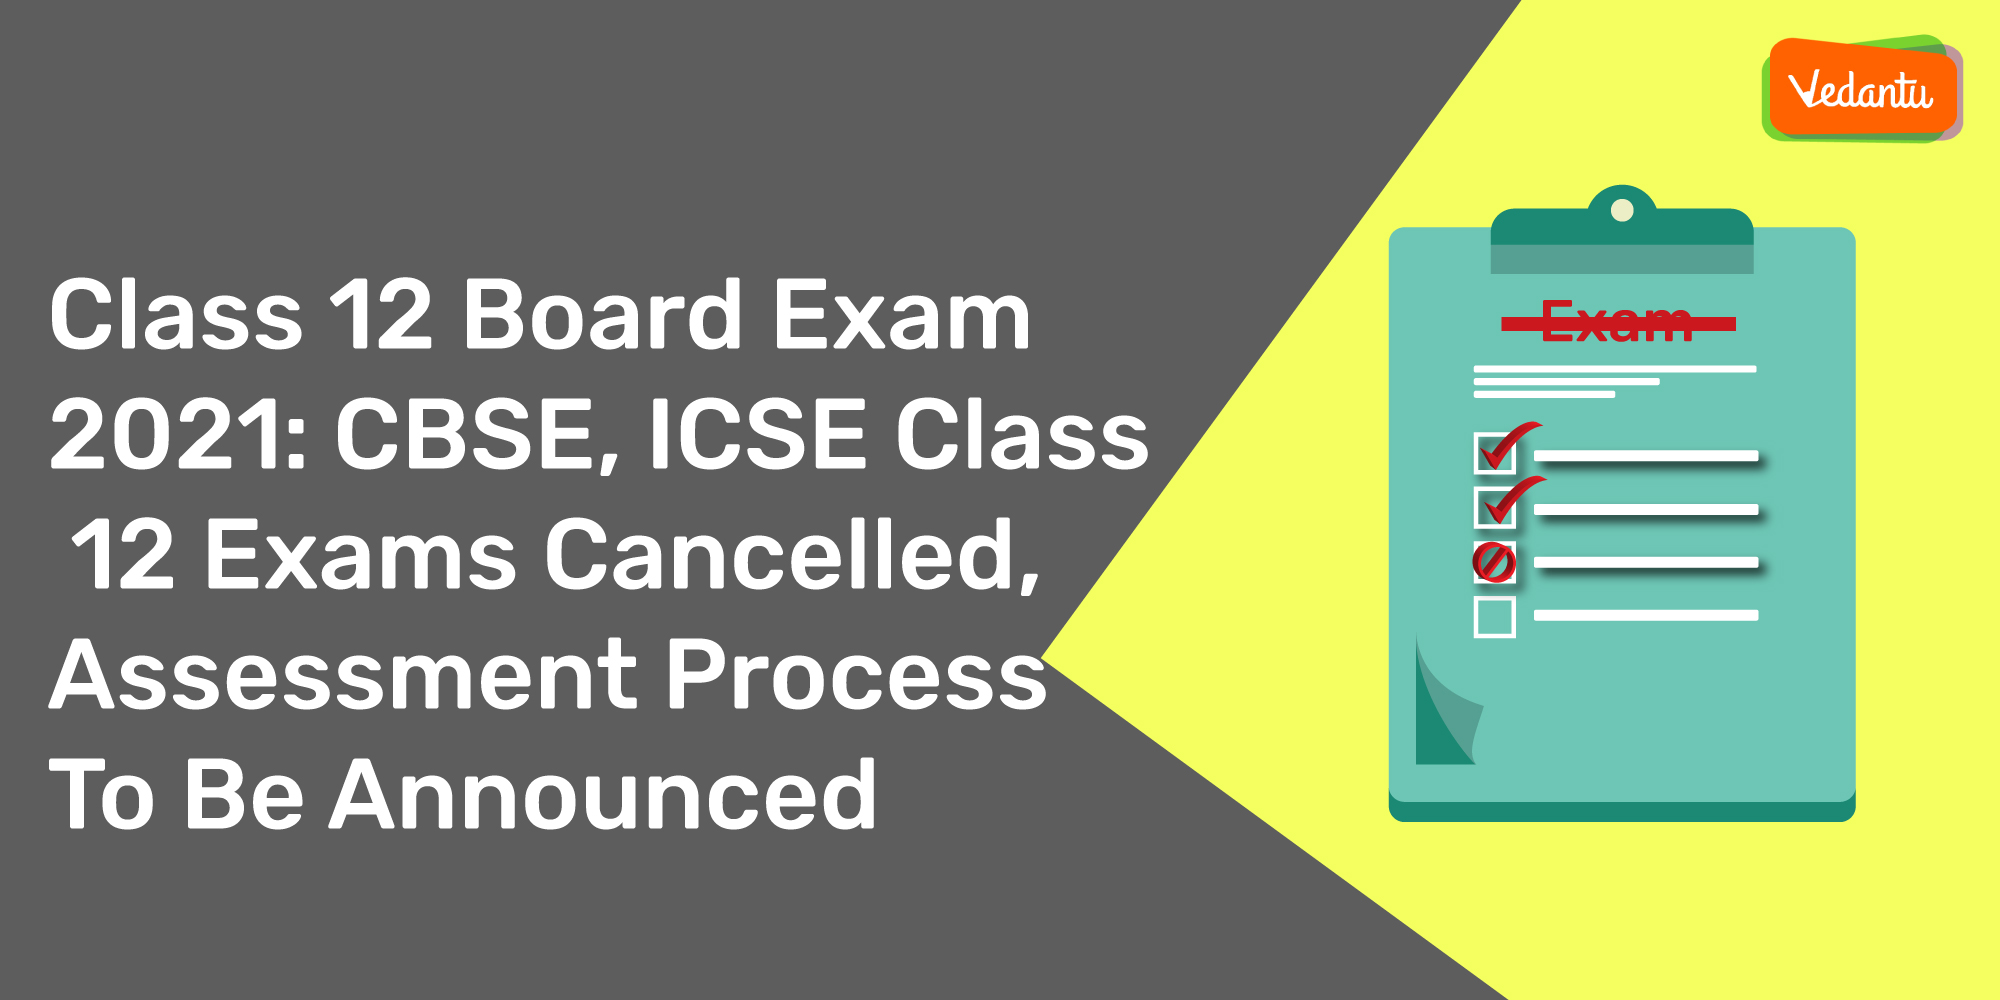 Class 12 Board Exam 2021: CBSE and ICSE Class 12 Exams Cancelled, Assessment Process To Be Announced